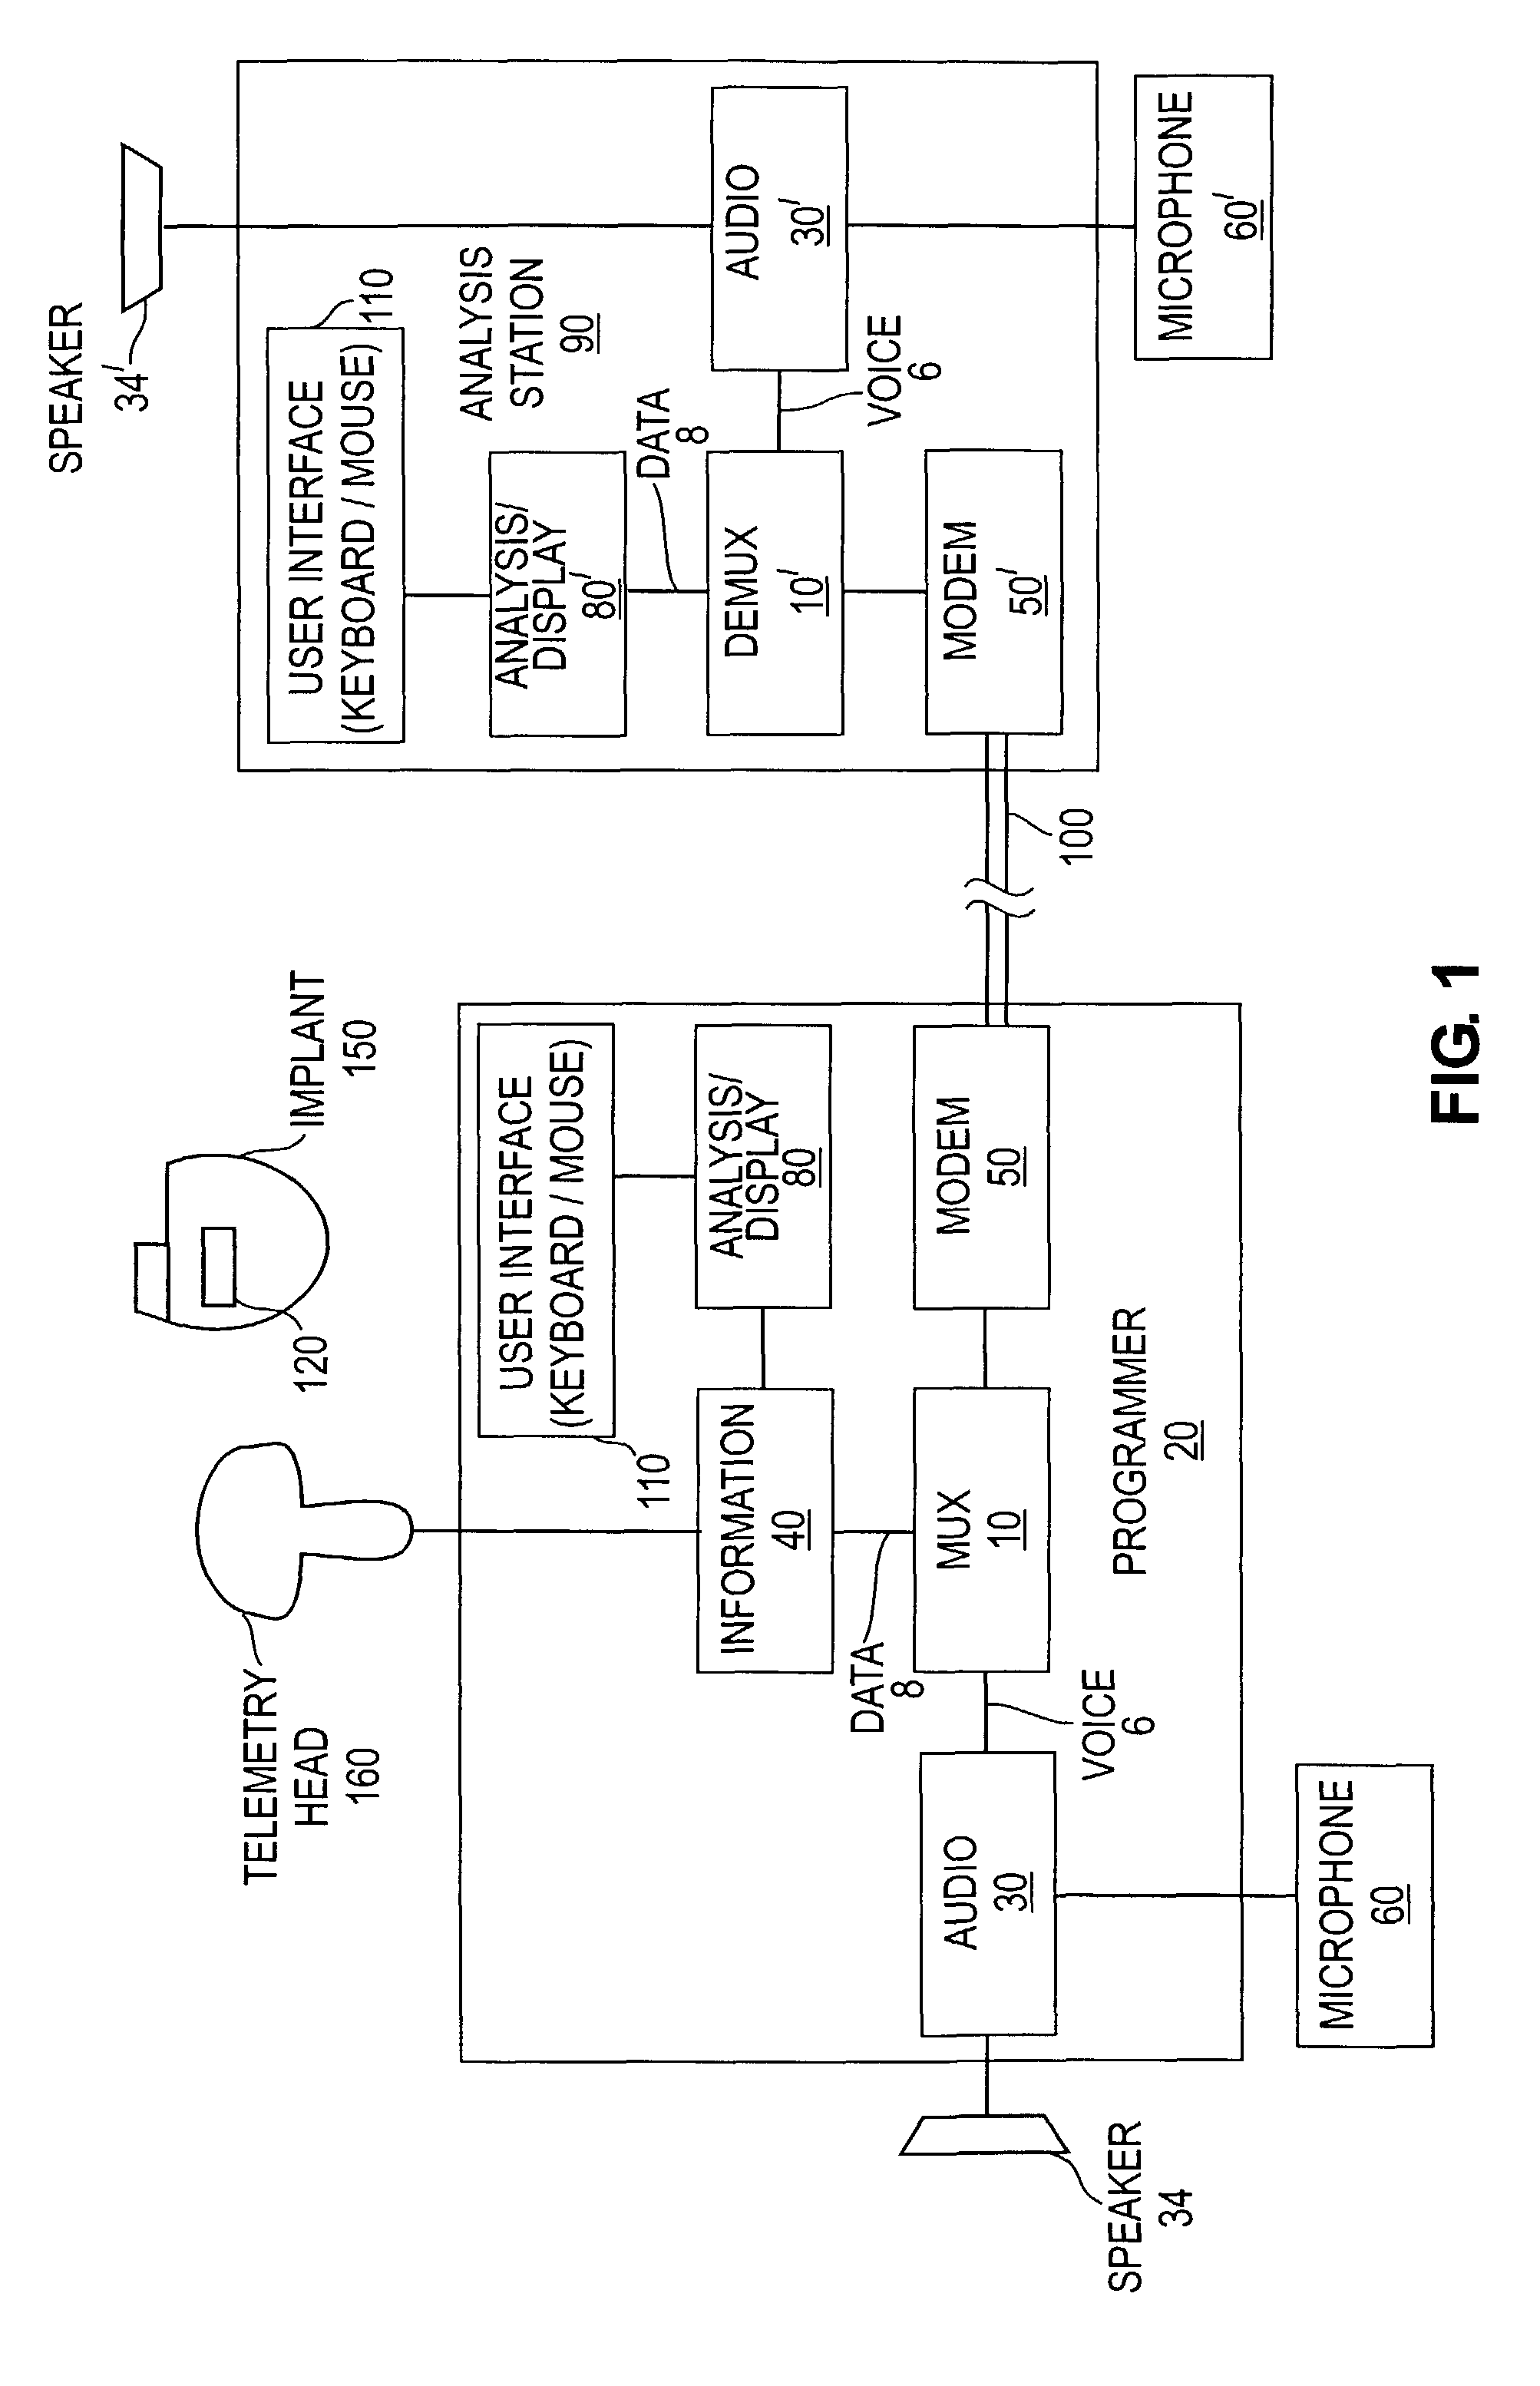 Remote support system for programming active implantable medical devices such as cardiac pacemakers, defibrillators, cardiovertors or multisite devices